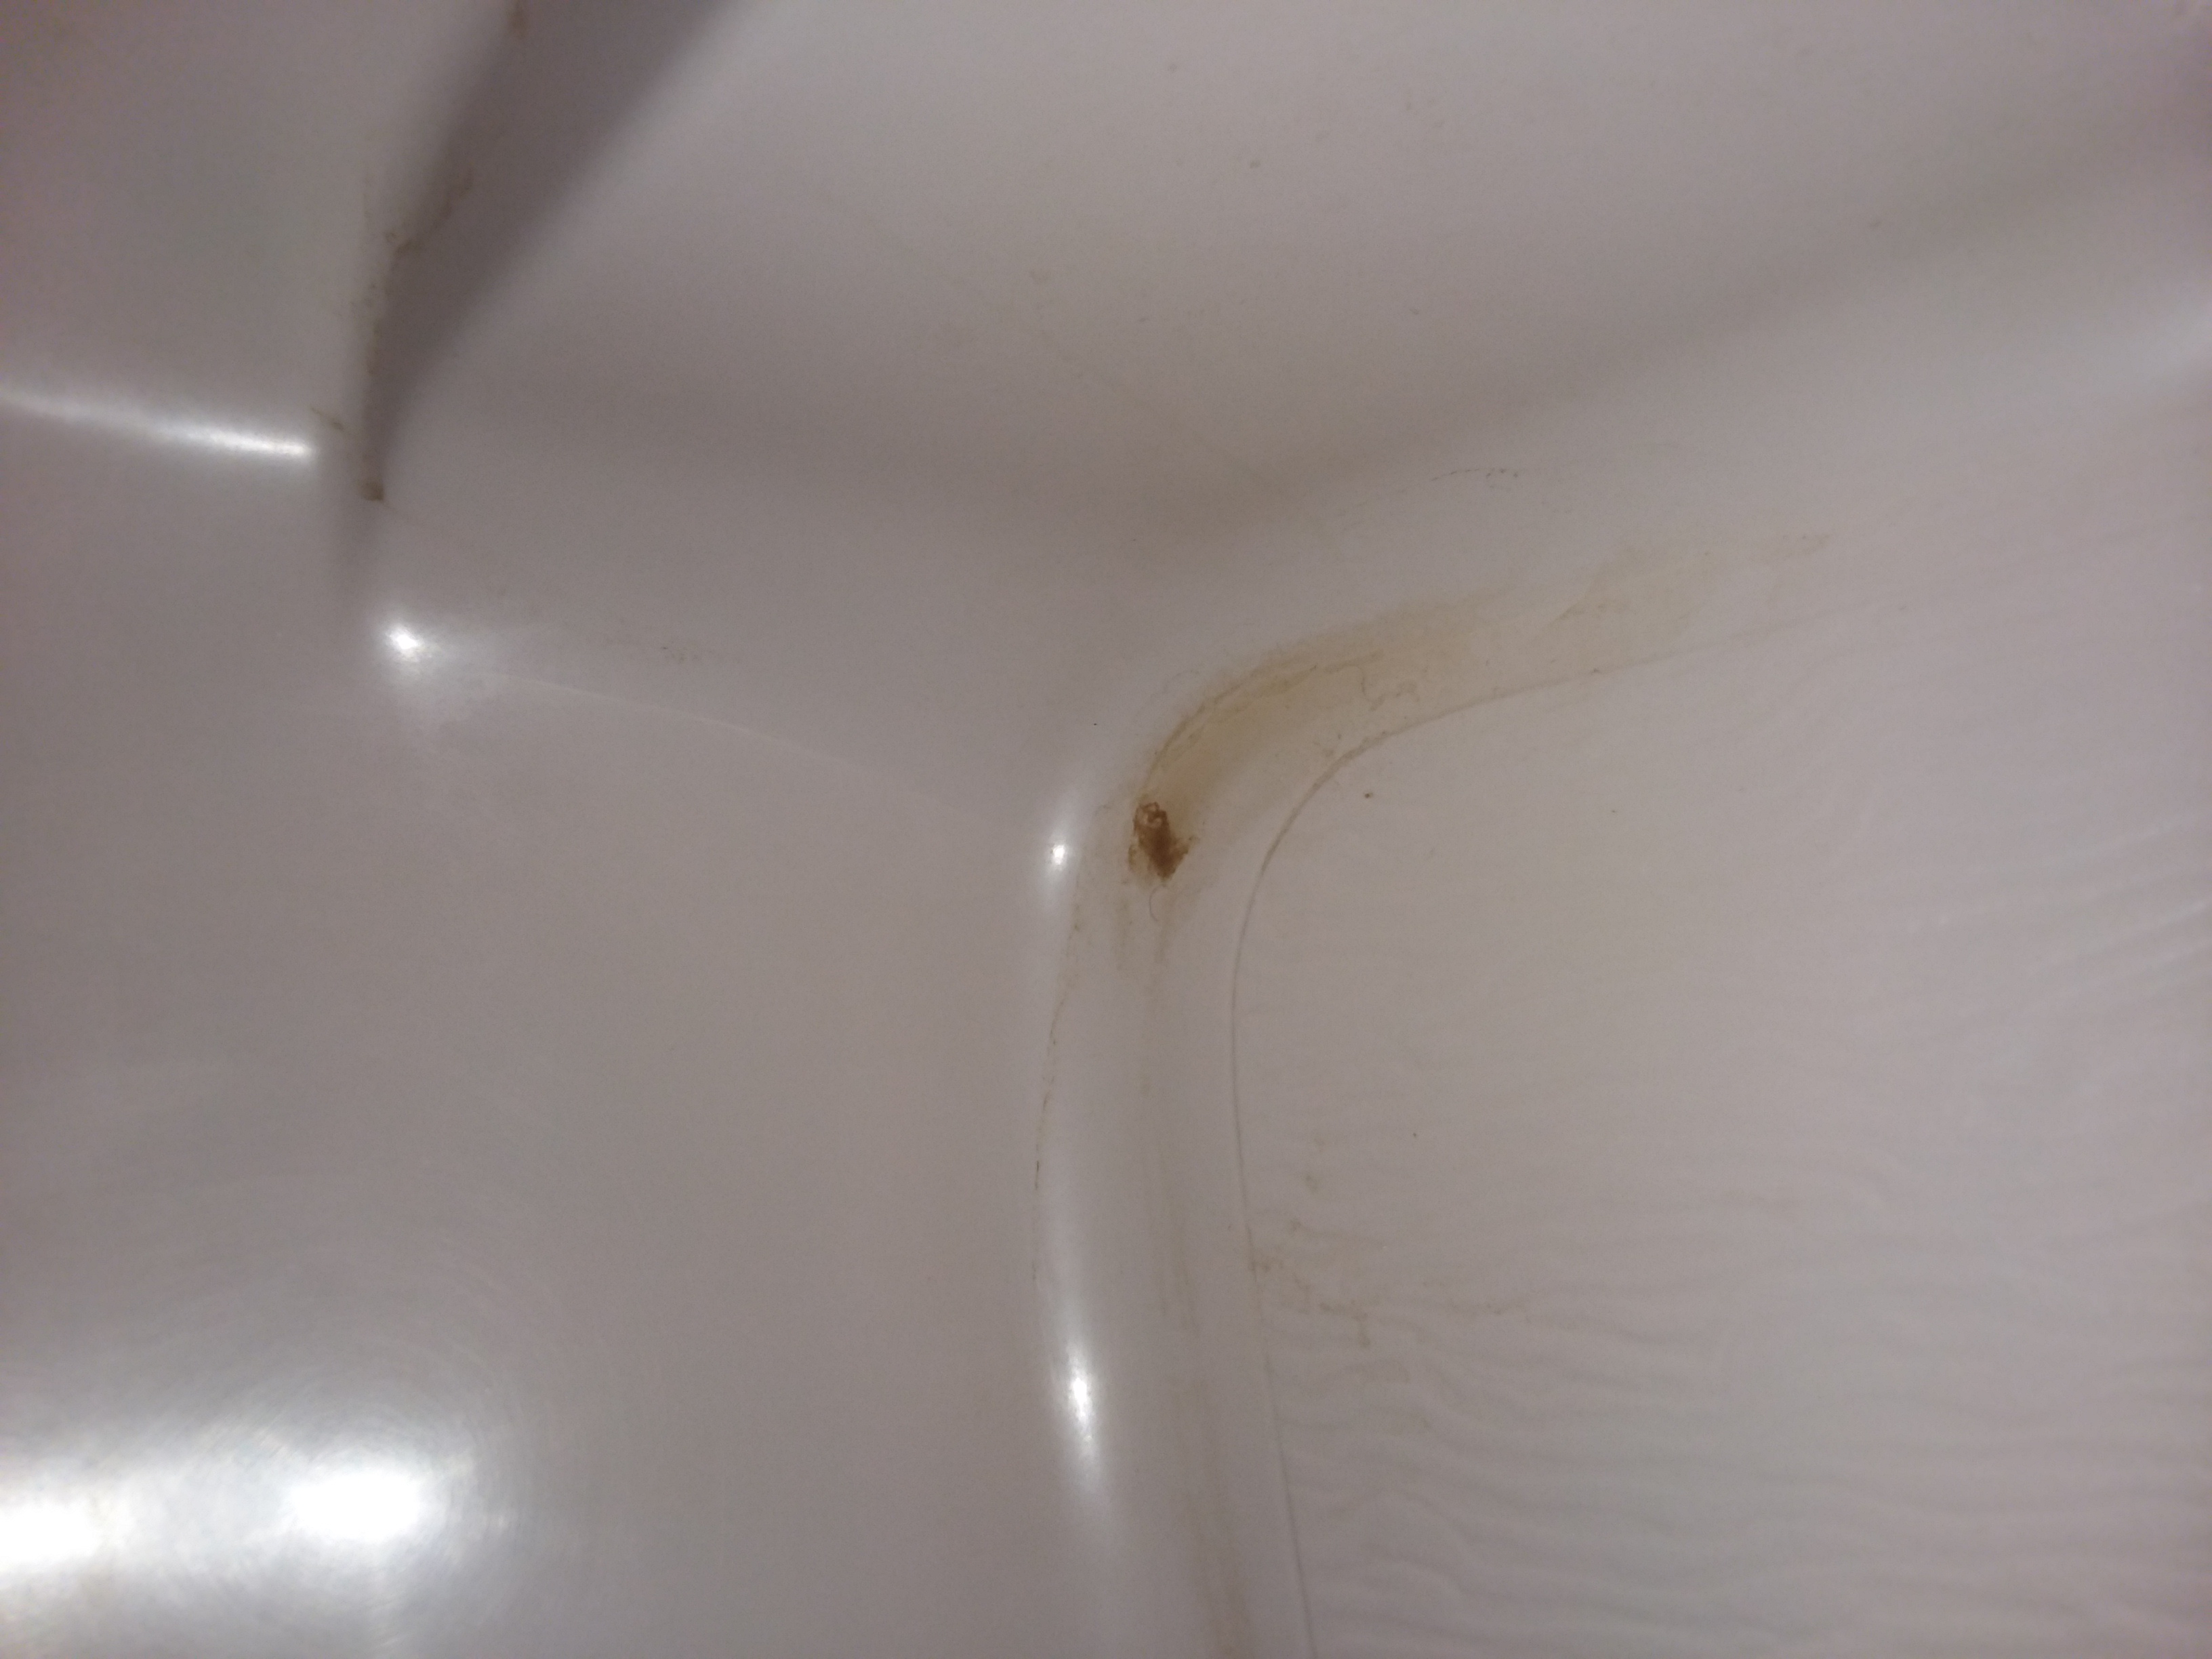 A Tiny Smidge Of Dirt In The Tub